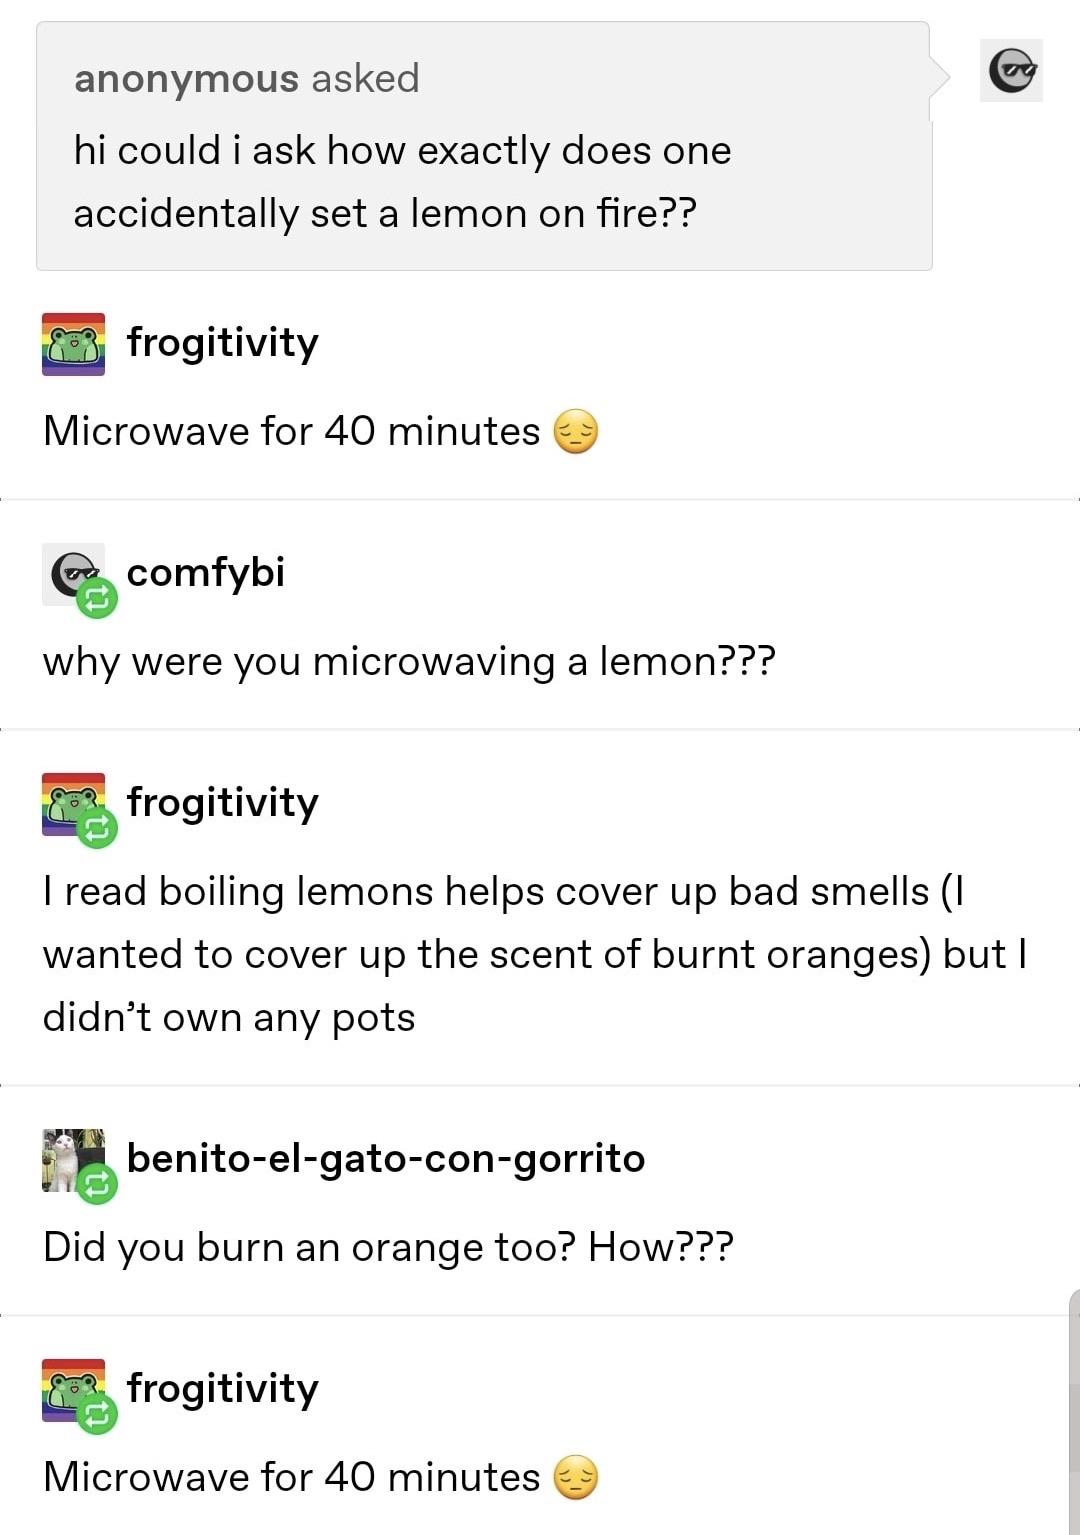 angle - anonymous asked hi could i ask how exactly does one accidentally set a lemon on fire?? frogitivity Microwave for 40 minutes Cu comfybi why were you microwaving a lemon??? frogitivity I read boiling lemons helps cover up bad smells I wanted to cove